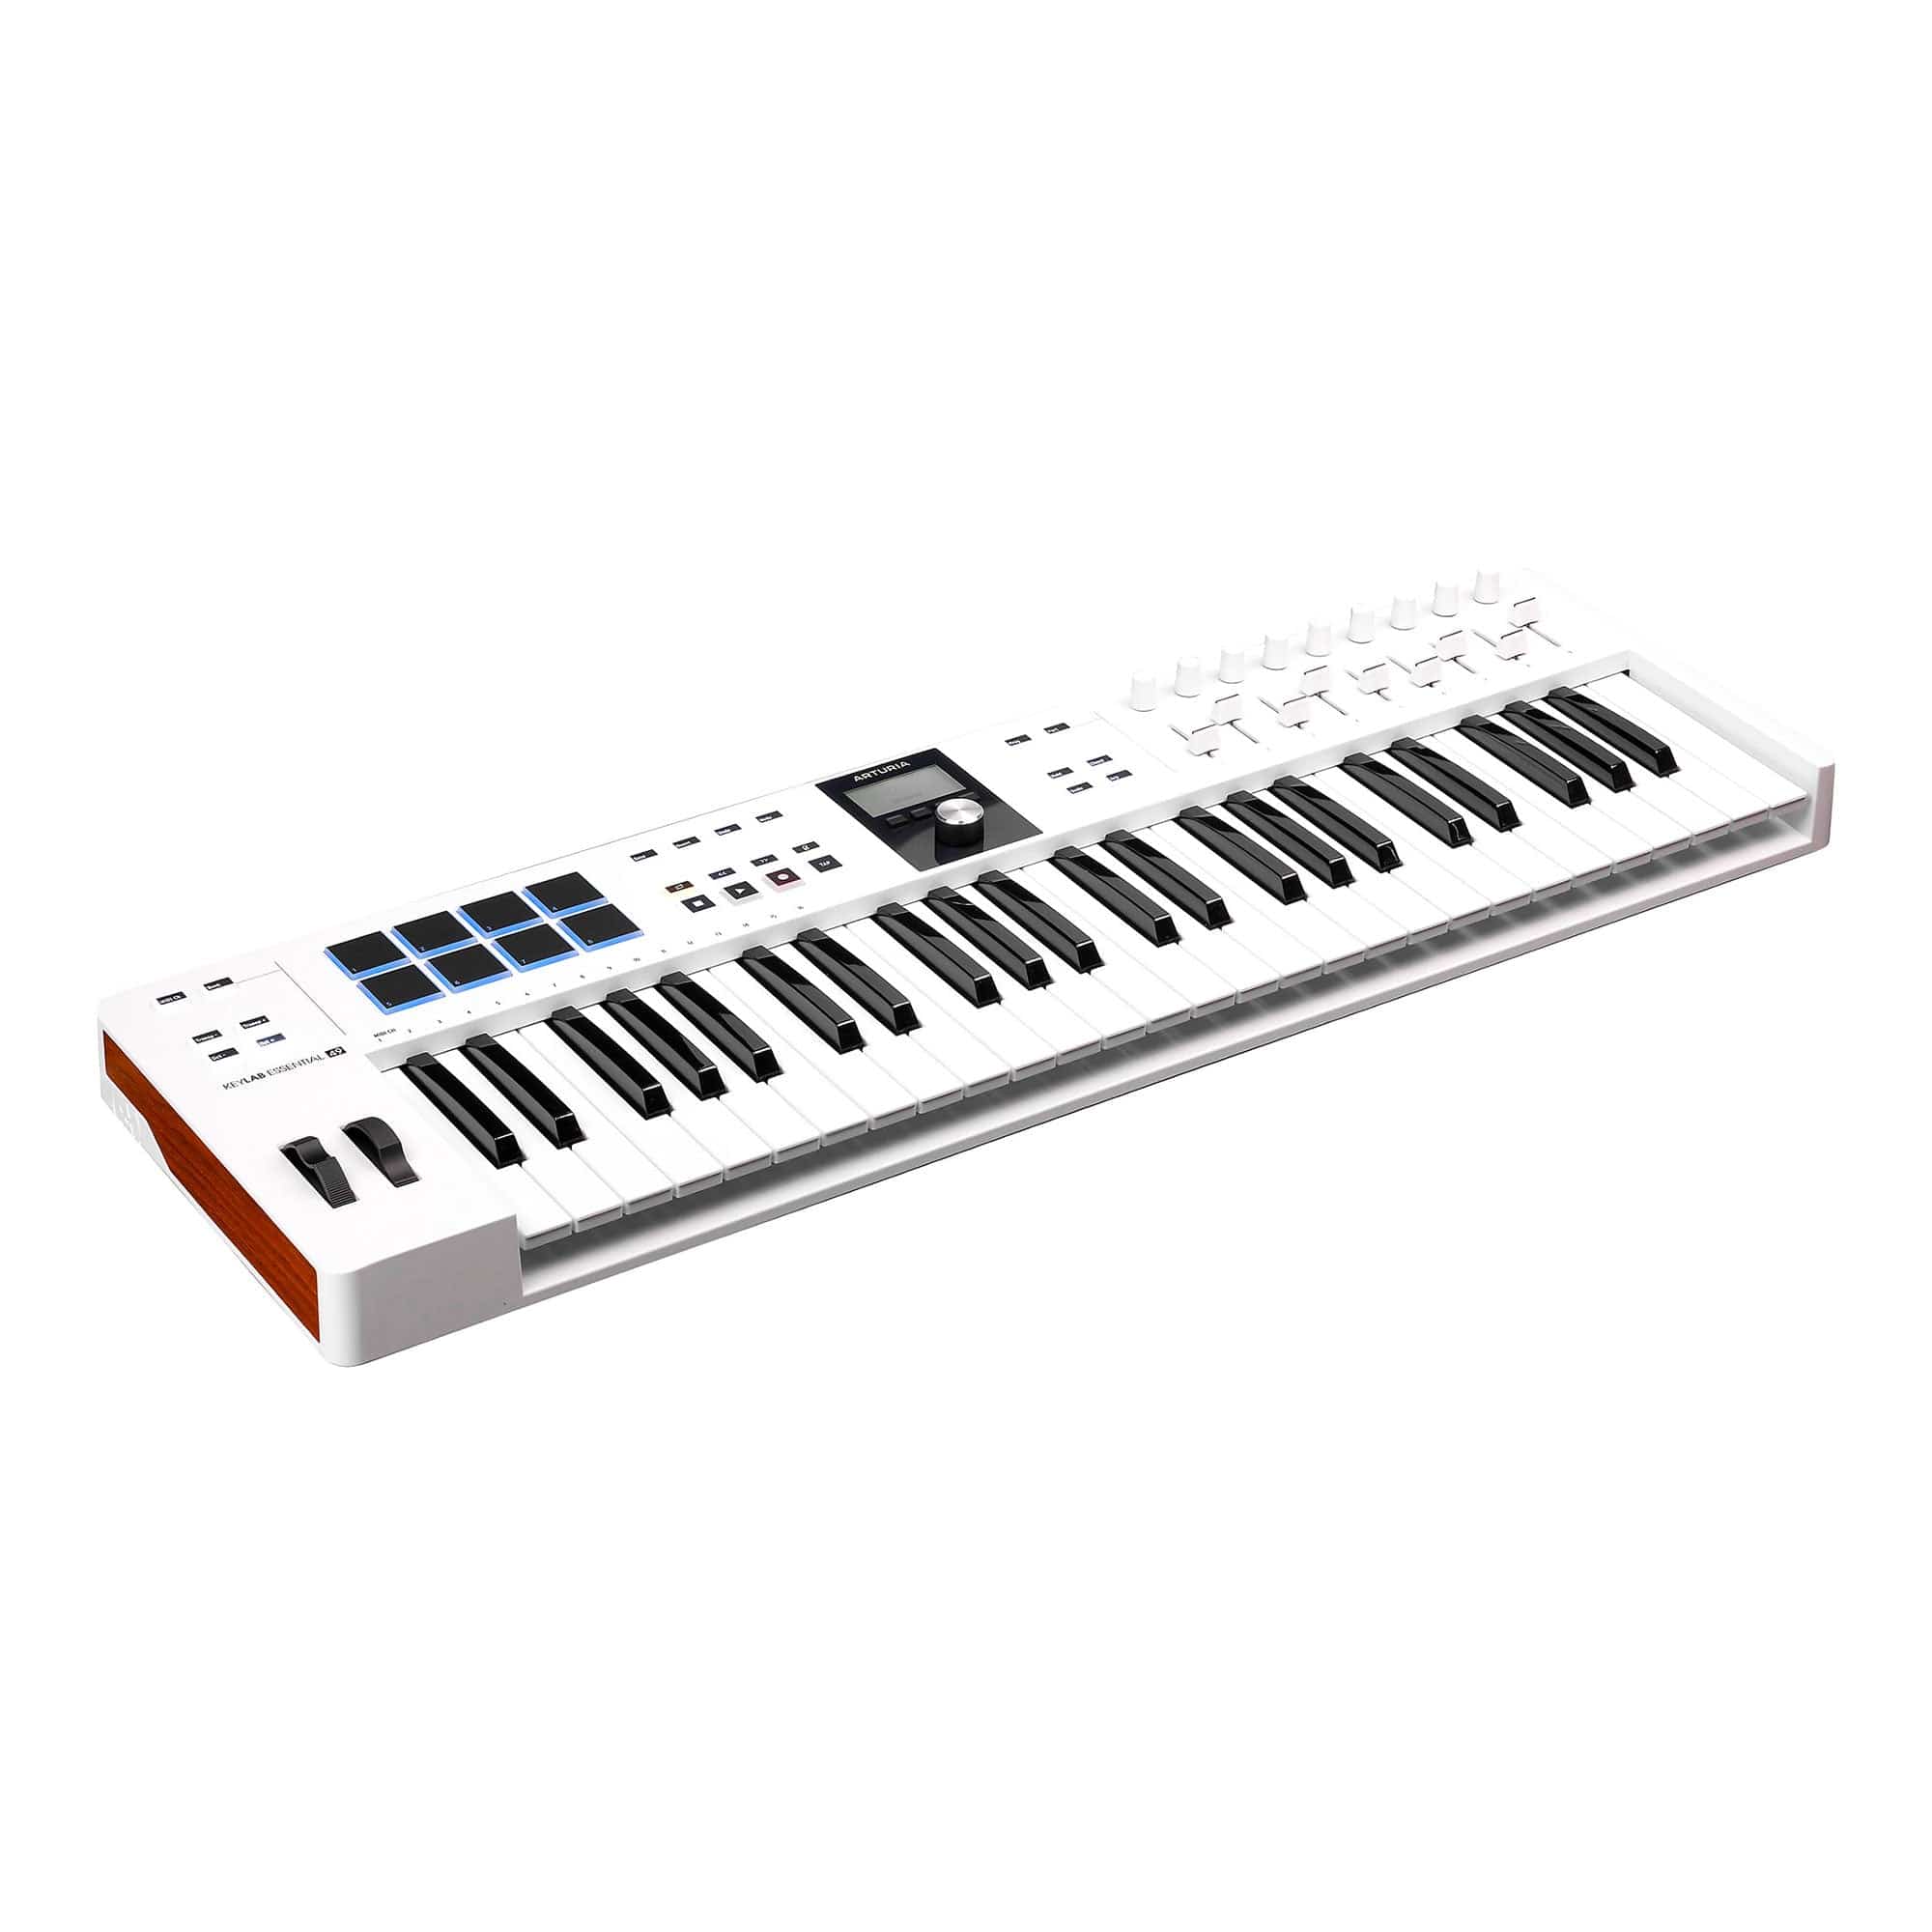 Arturia KeyLab Essential 49 MK3 MIDI Keyboard Controller White Effects and Pedals / Controllers, Volume and Expression